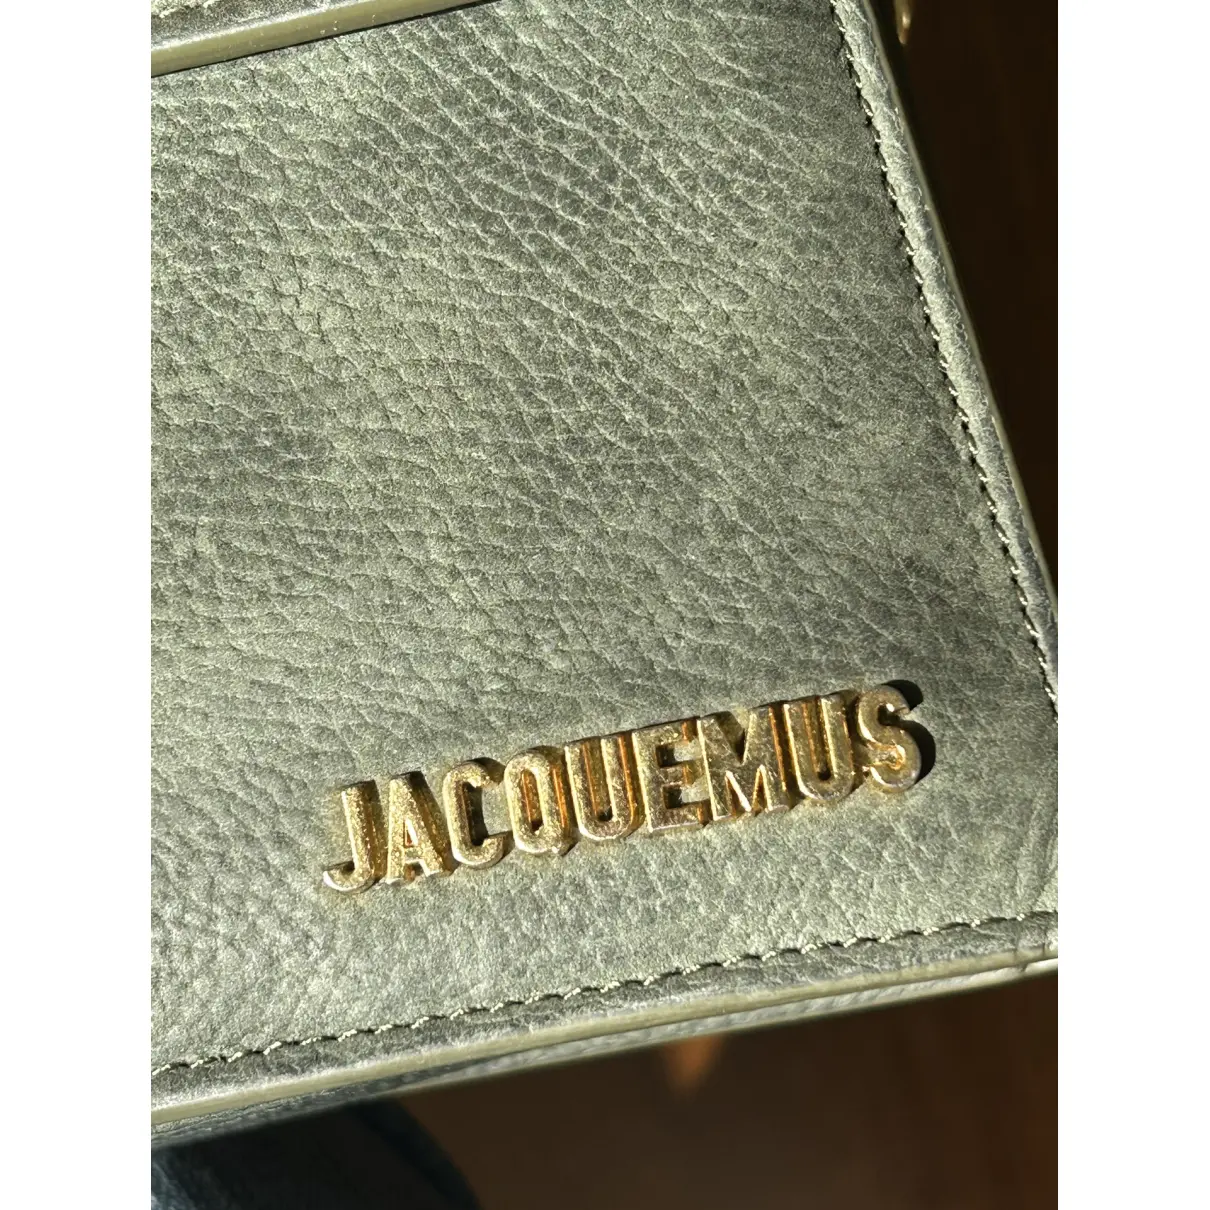 Buy Jacquemus Le Grand Bambino leather tote online